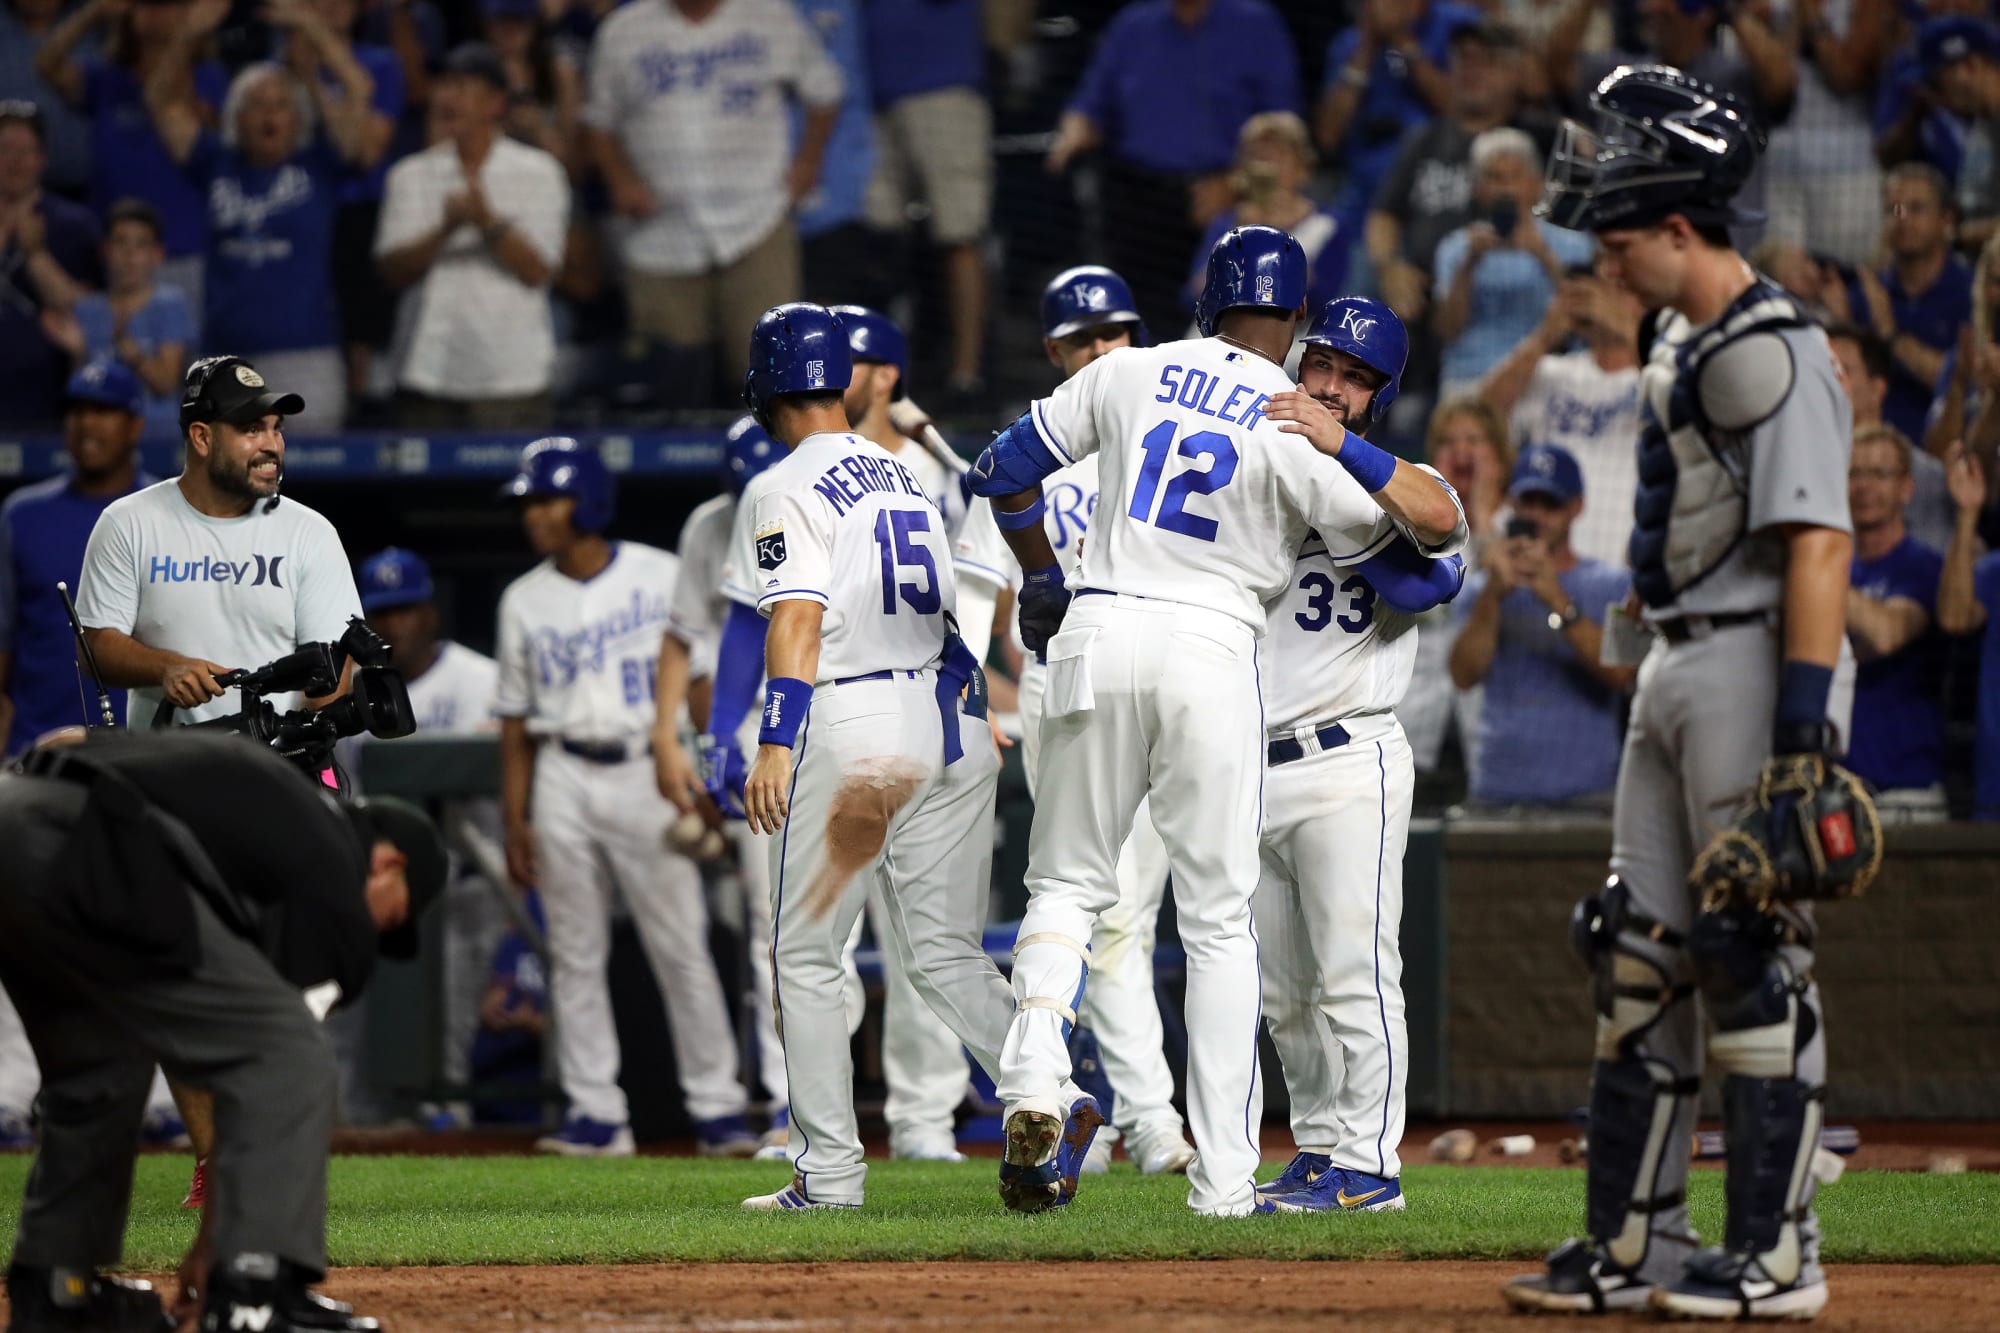 Kansas City Royals: Why the Royals have a real chance for the playoffs